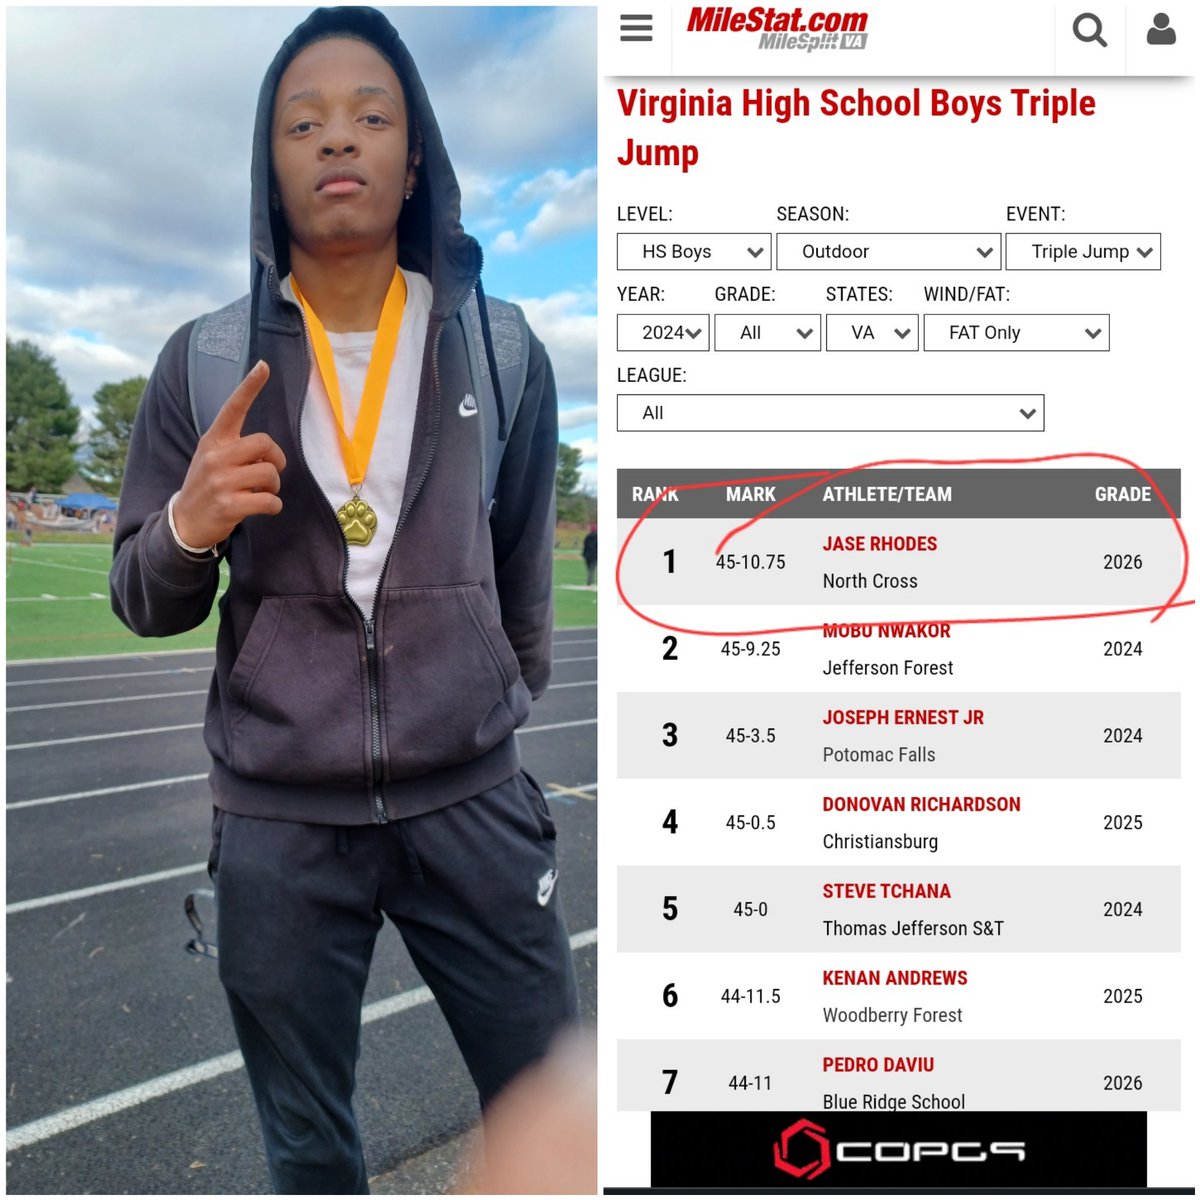 Good first meet of the outdoor season with the Triple Jump. Also placed 4th in the Long Jump with a PR..Consistent work‼️ Currently #1 in Virginia rankings but working more than ever. @Richman4812 @DmvSportsLive6 @toby_lux @RocCarmichael @CoachP_eterson @carljfred @PrepRedzone…